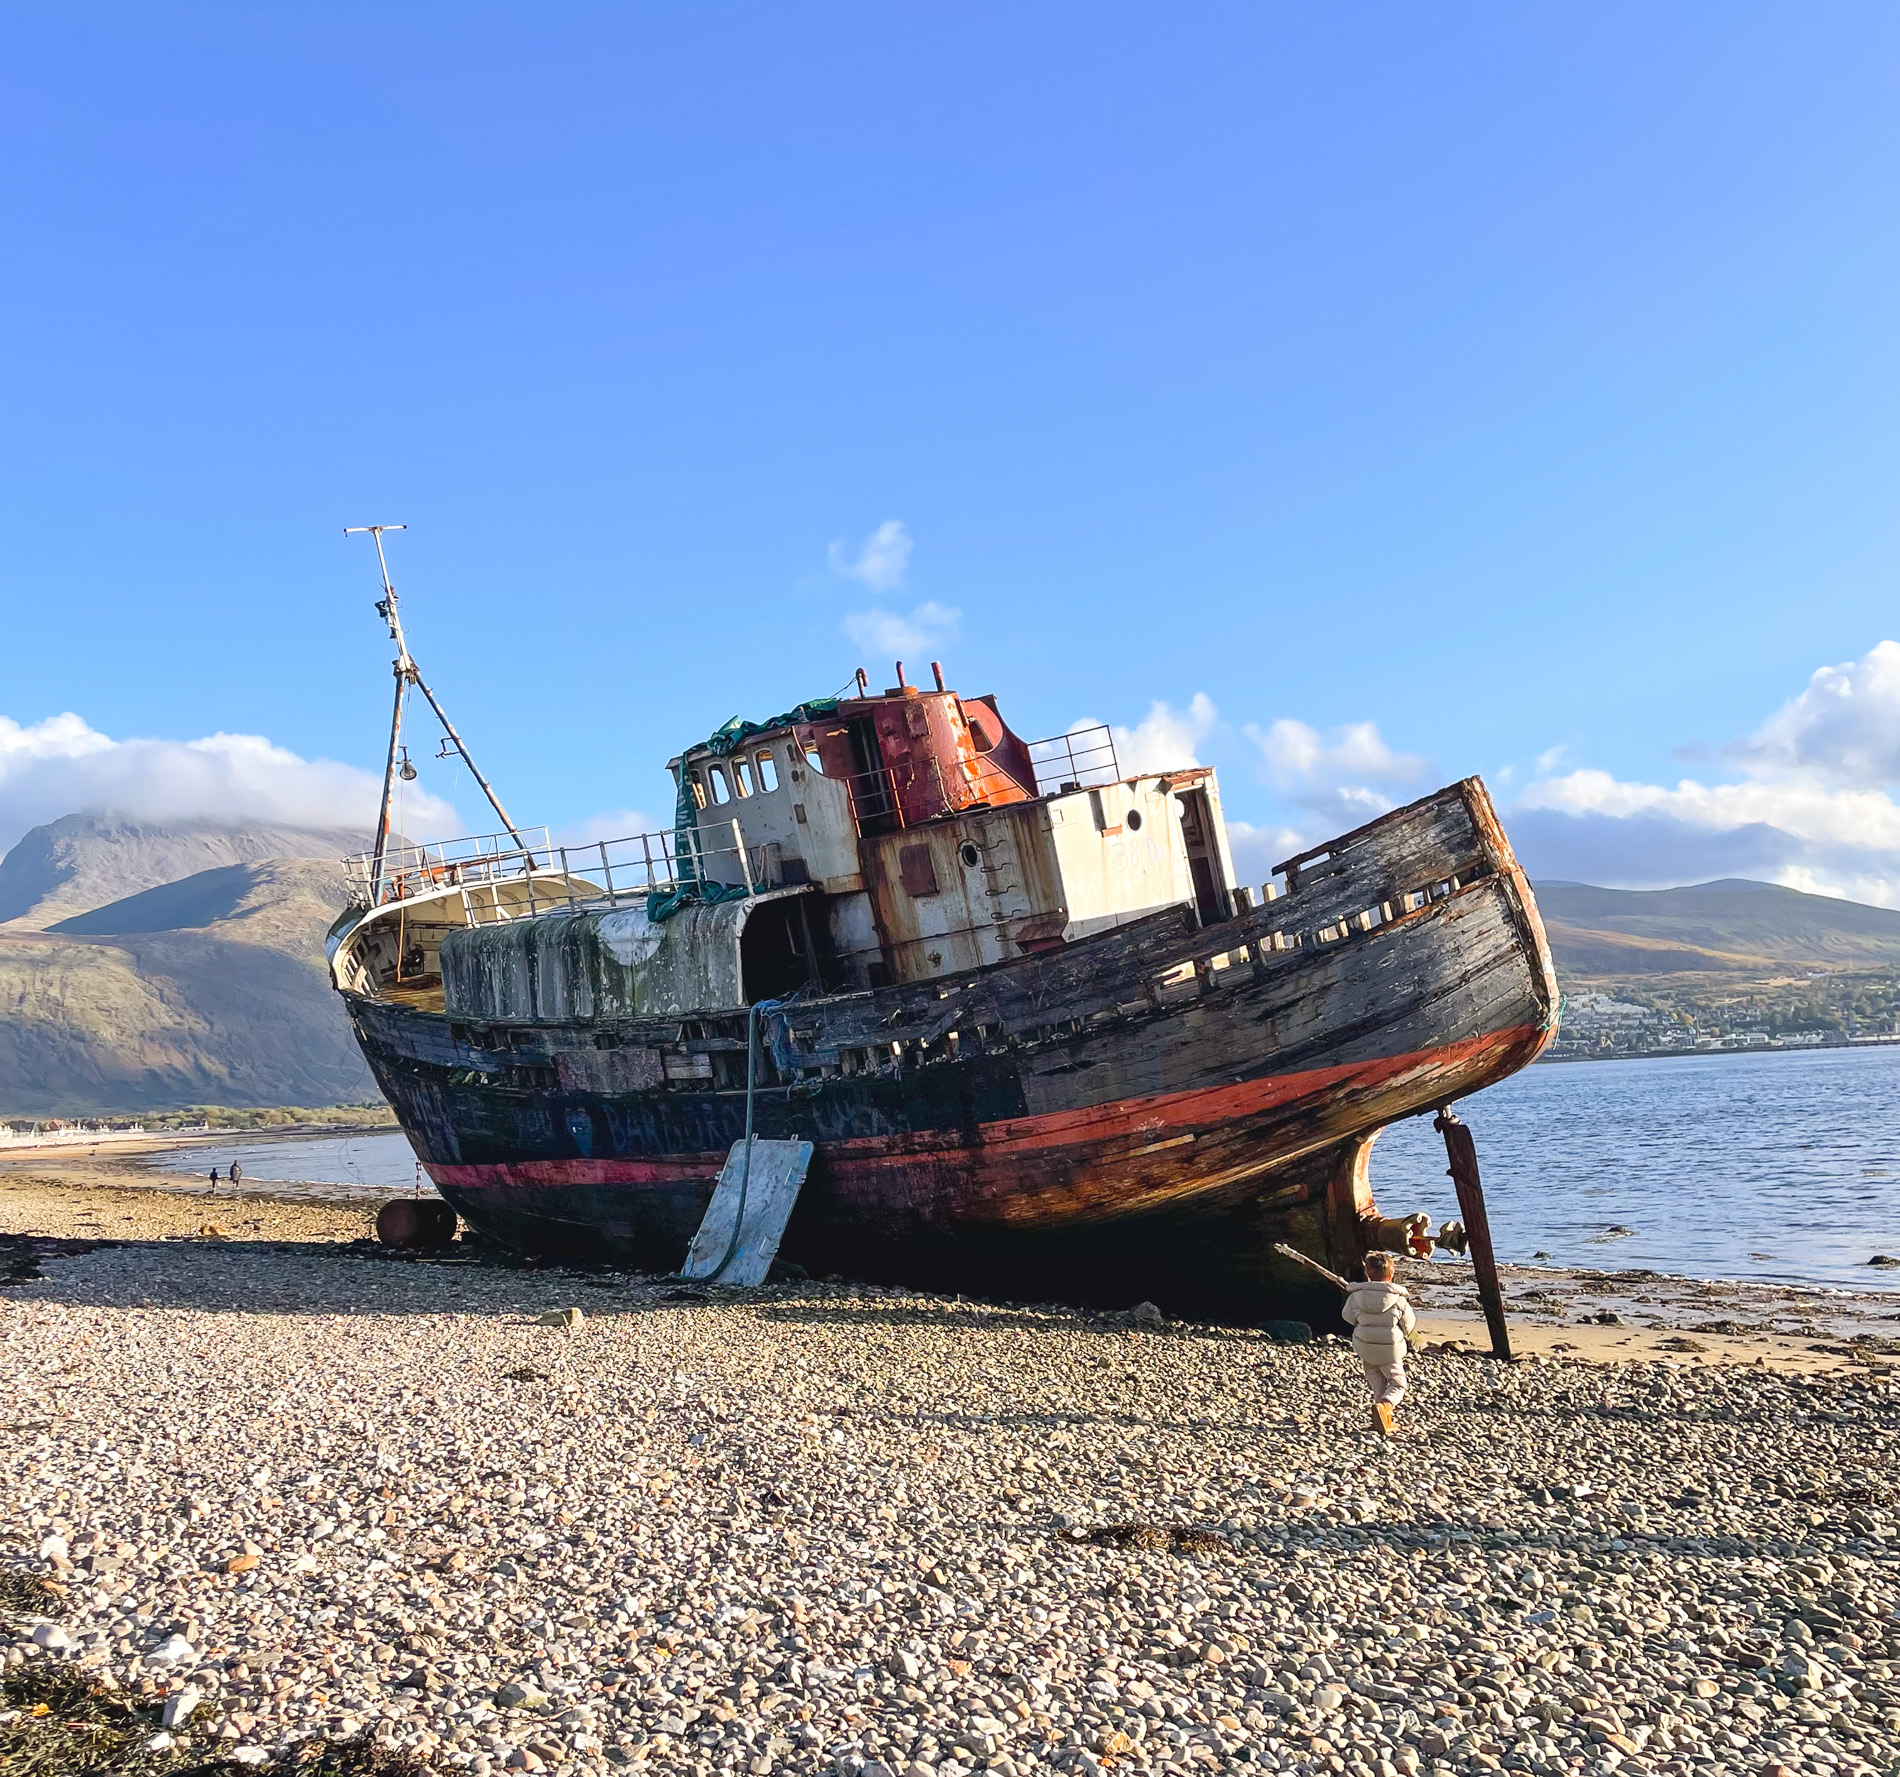 Visit the wreck of the MV dayspring near Fort William, Scotland